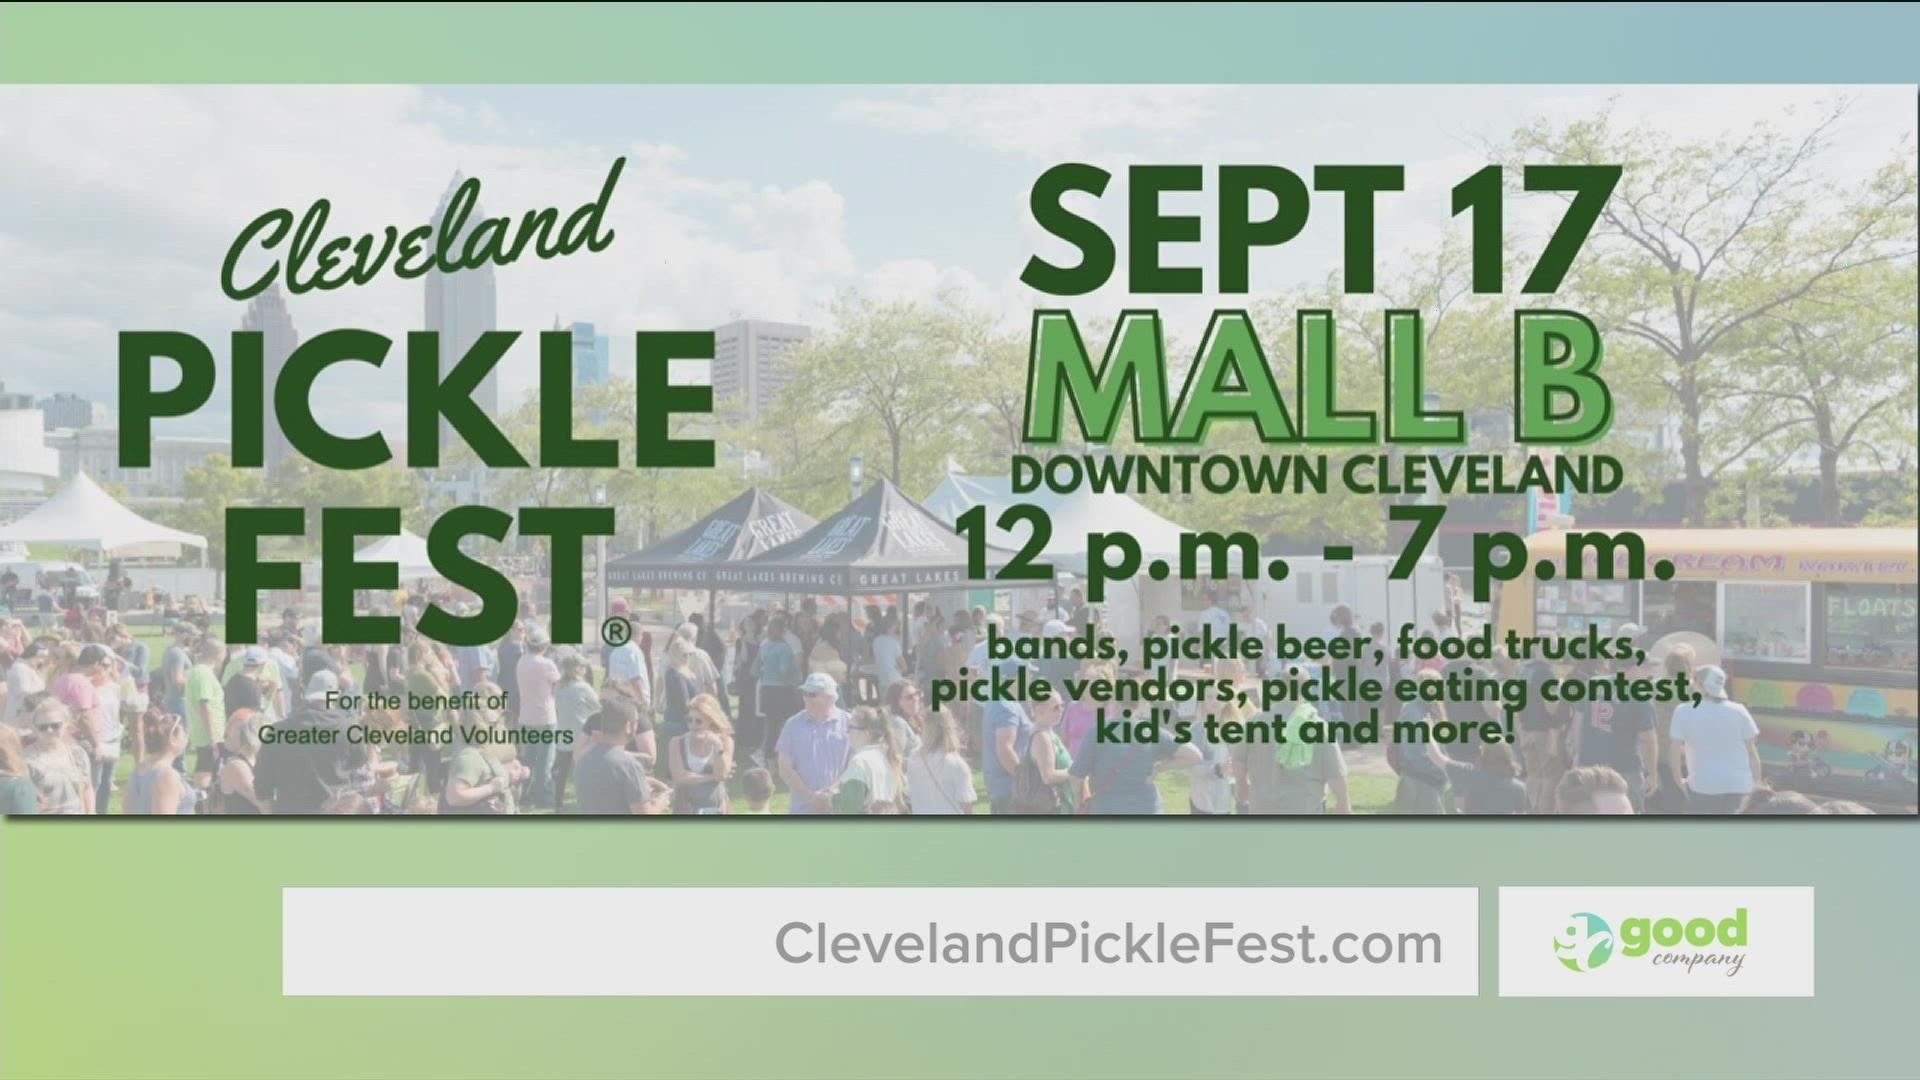 Joe & Ciarra talk to Joy Banish and Dilly about the upcoming Cleveland Pickle Fest.